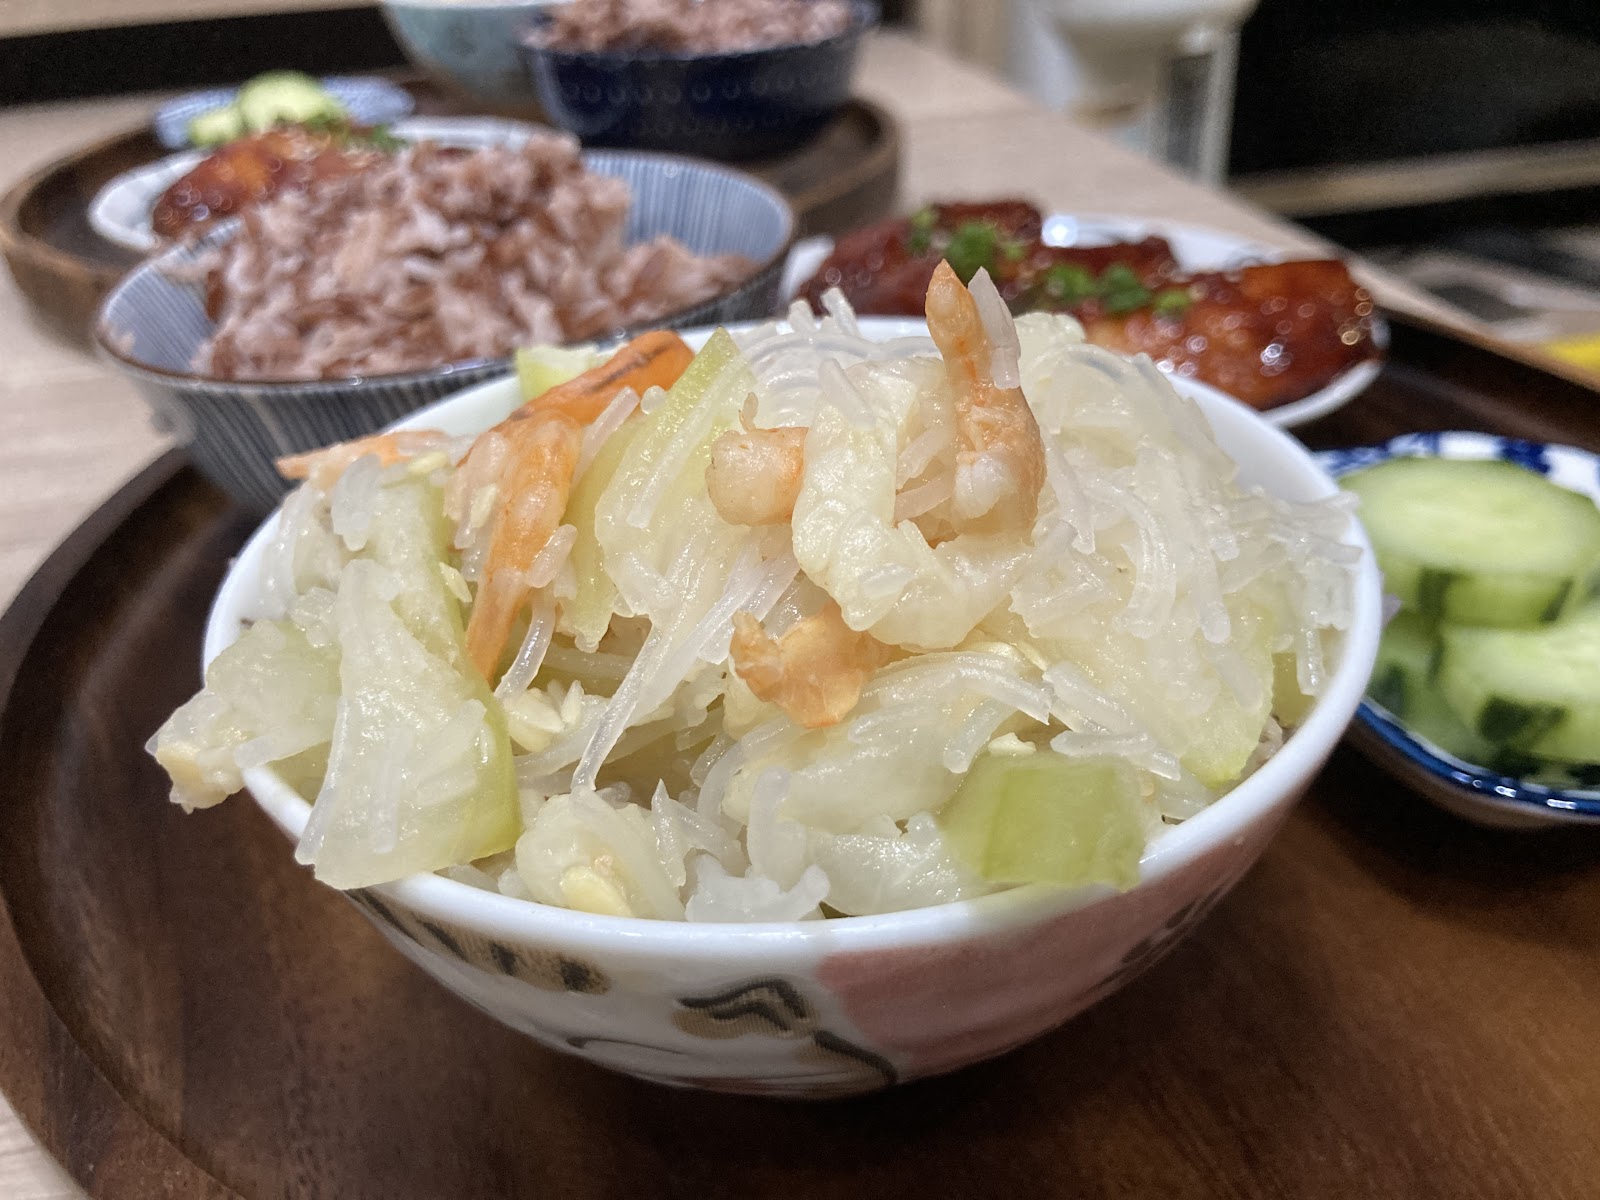 Hairy Cucumber with glass noodles and dried shrimp